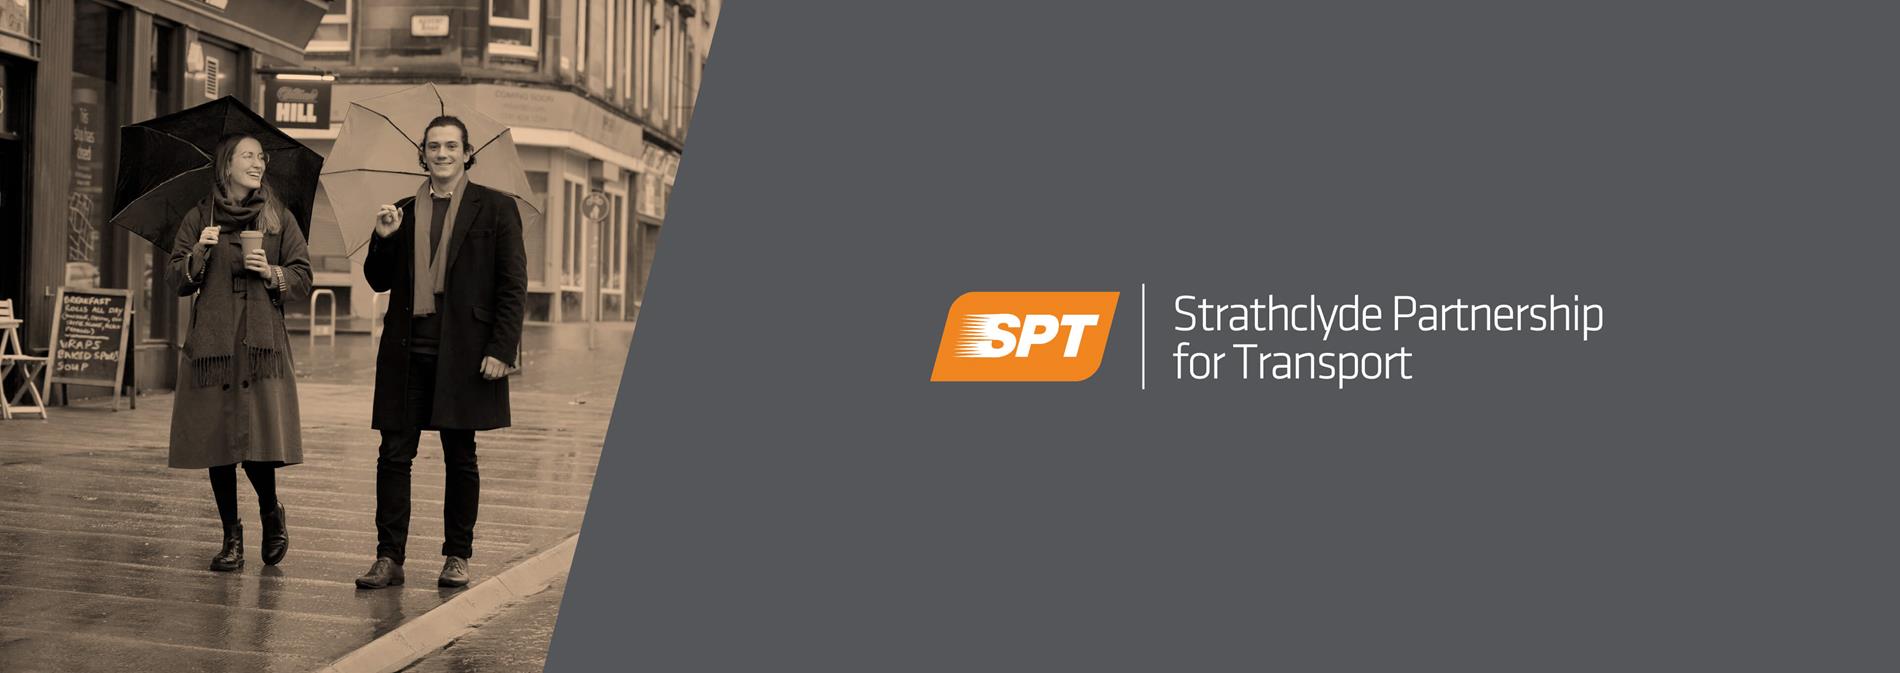 Active Travel Strategy Strathclyde Partnership For Transport